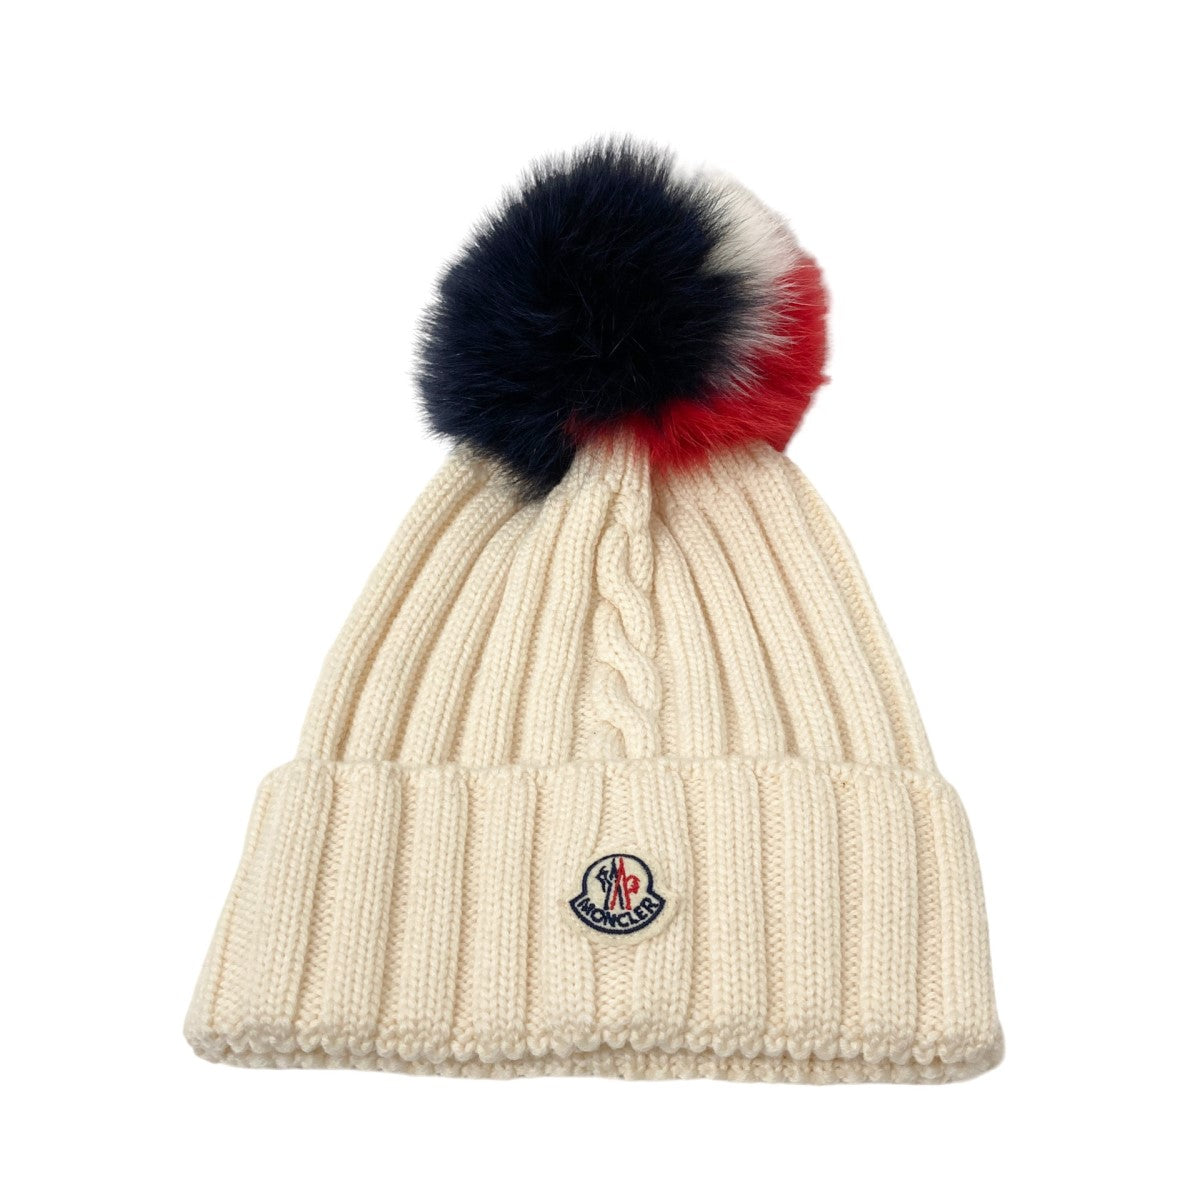 MONCLER(モンクレール) BERRETTO TRICOT ニットキャップ D20939960410 